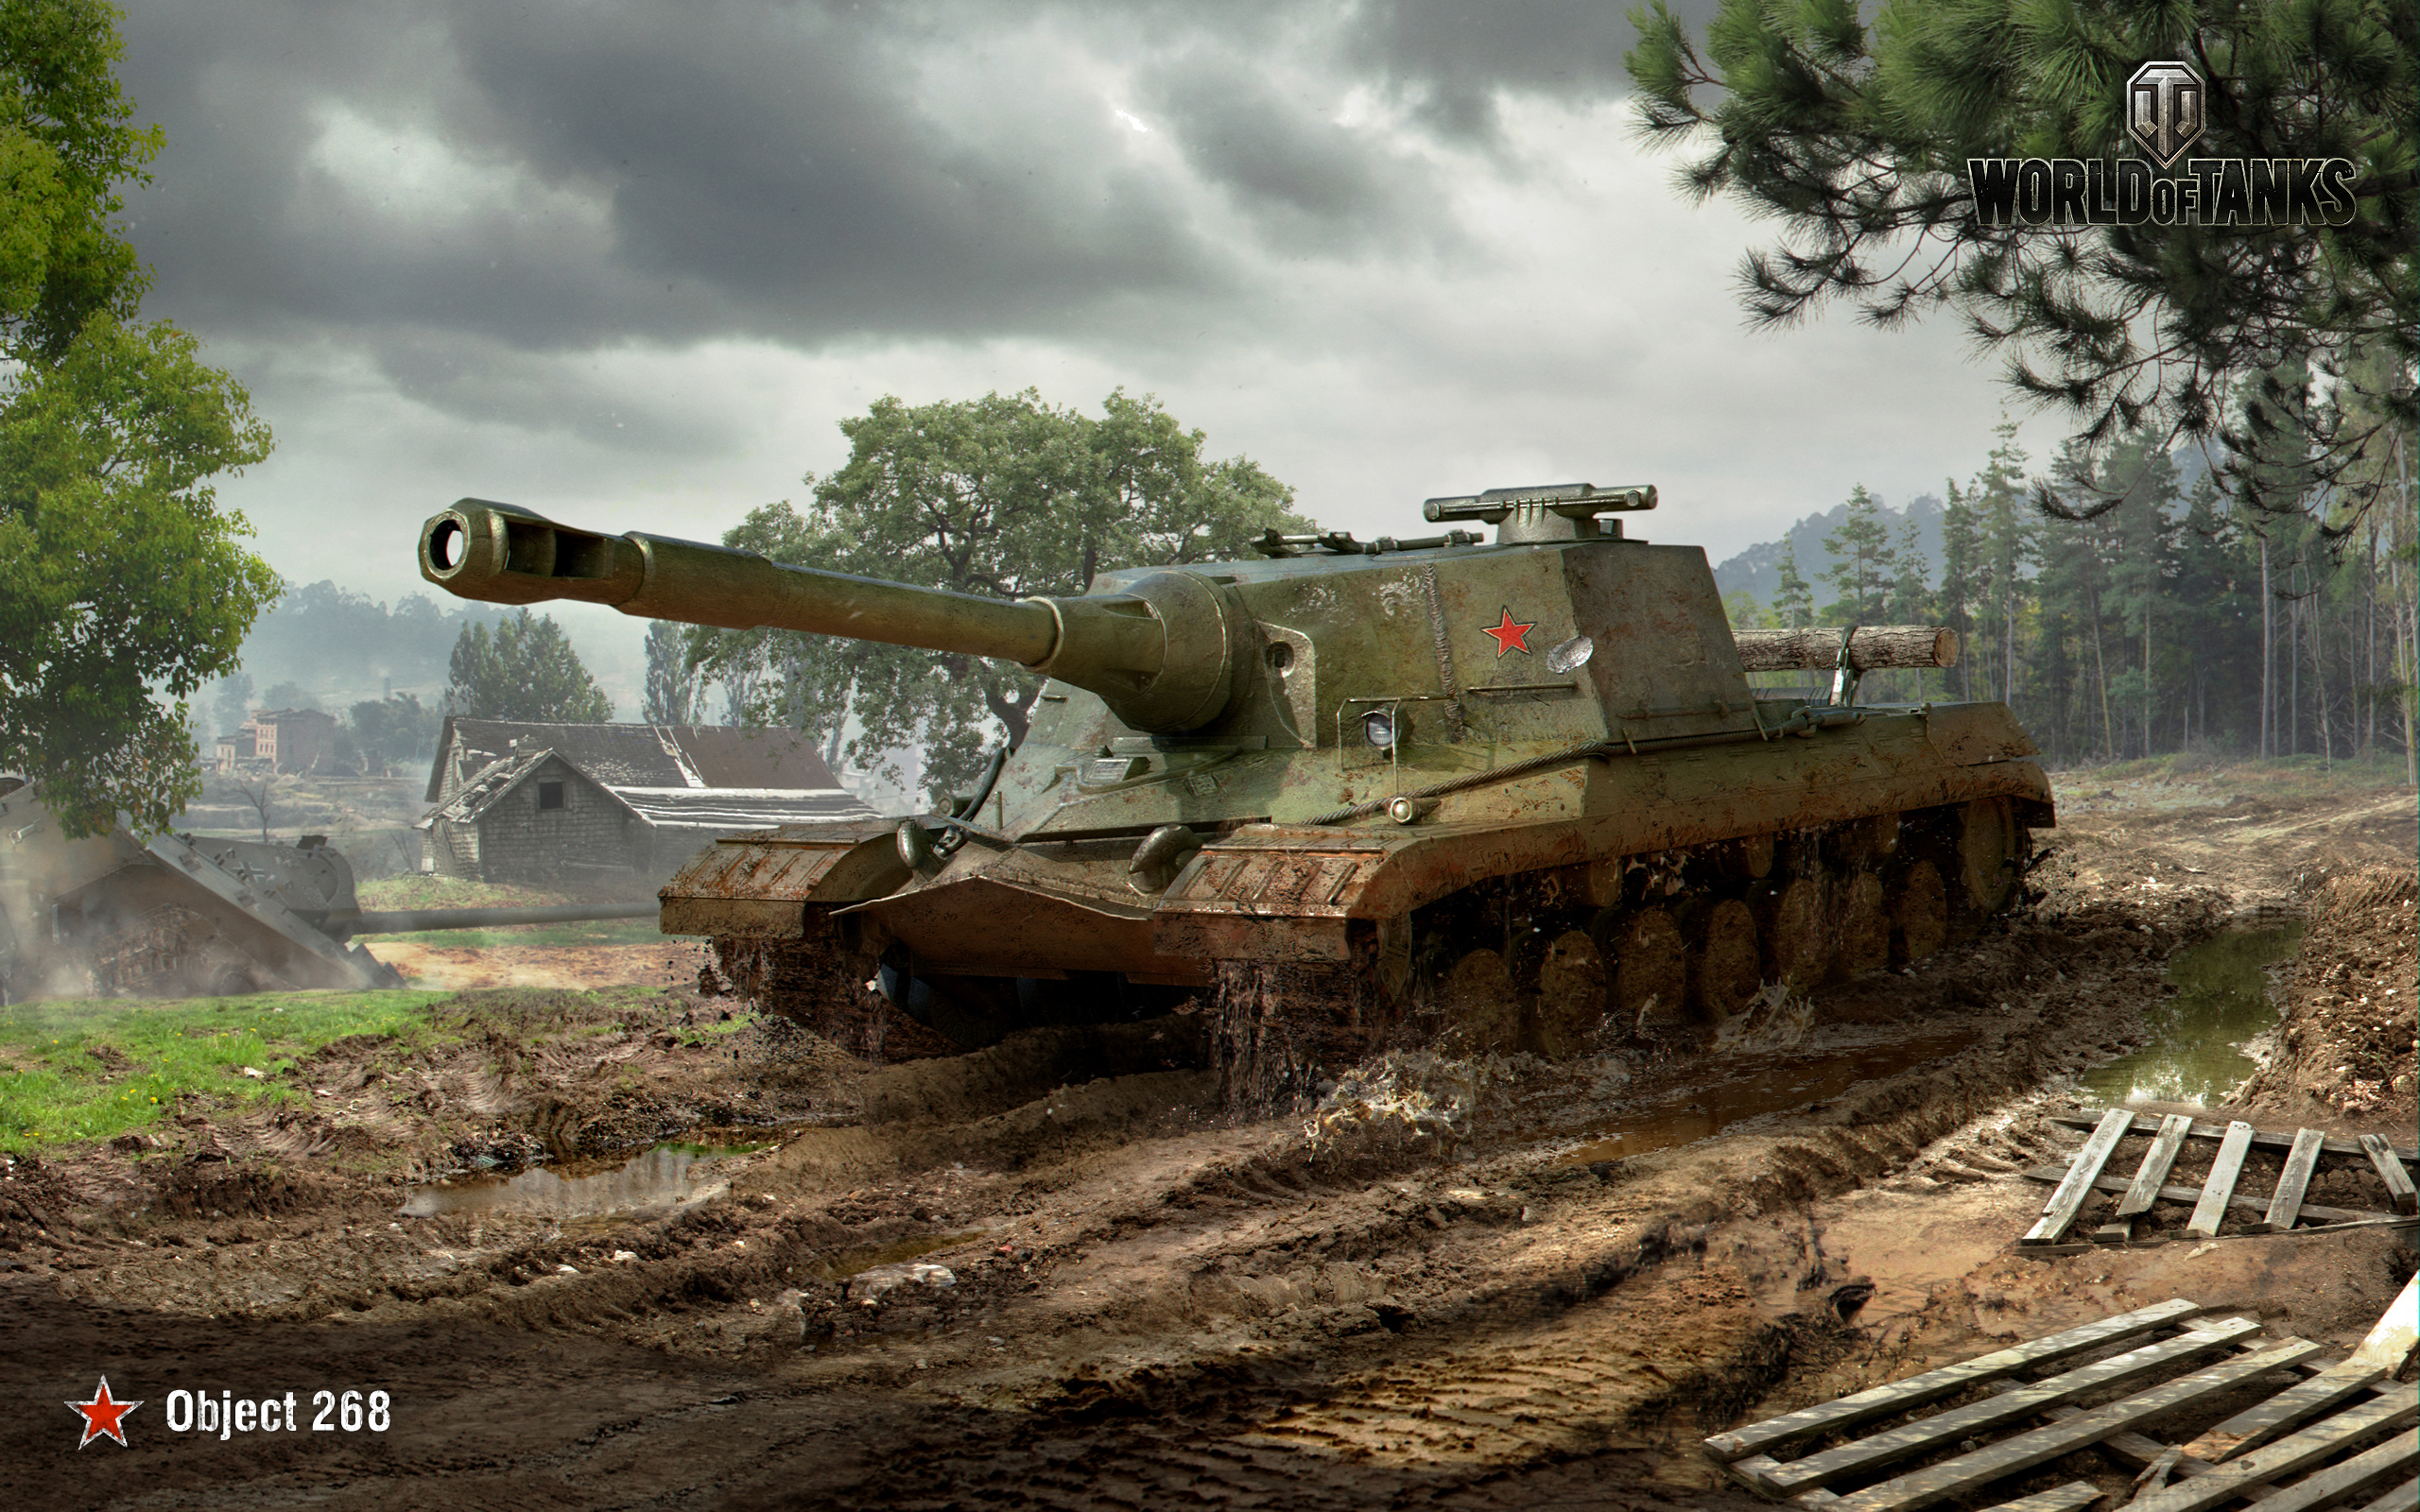 World Of Tanks Wallpapers